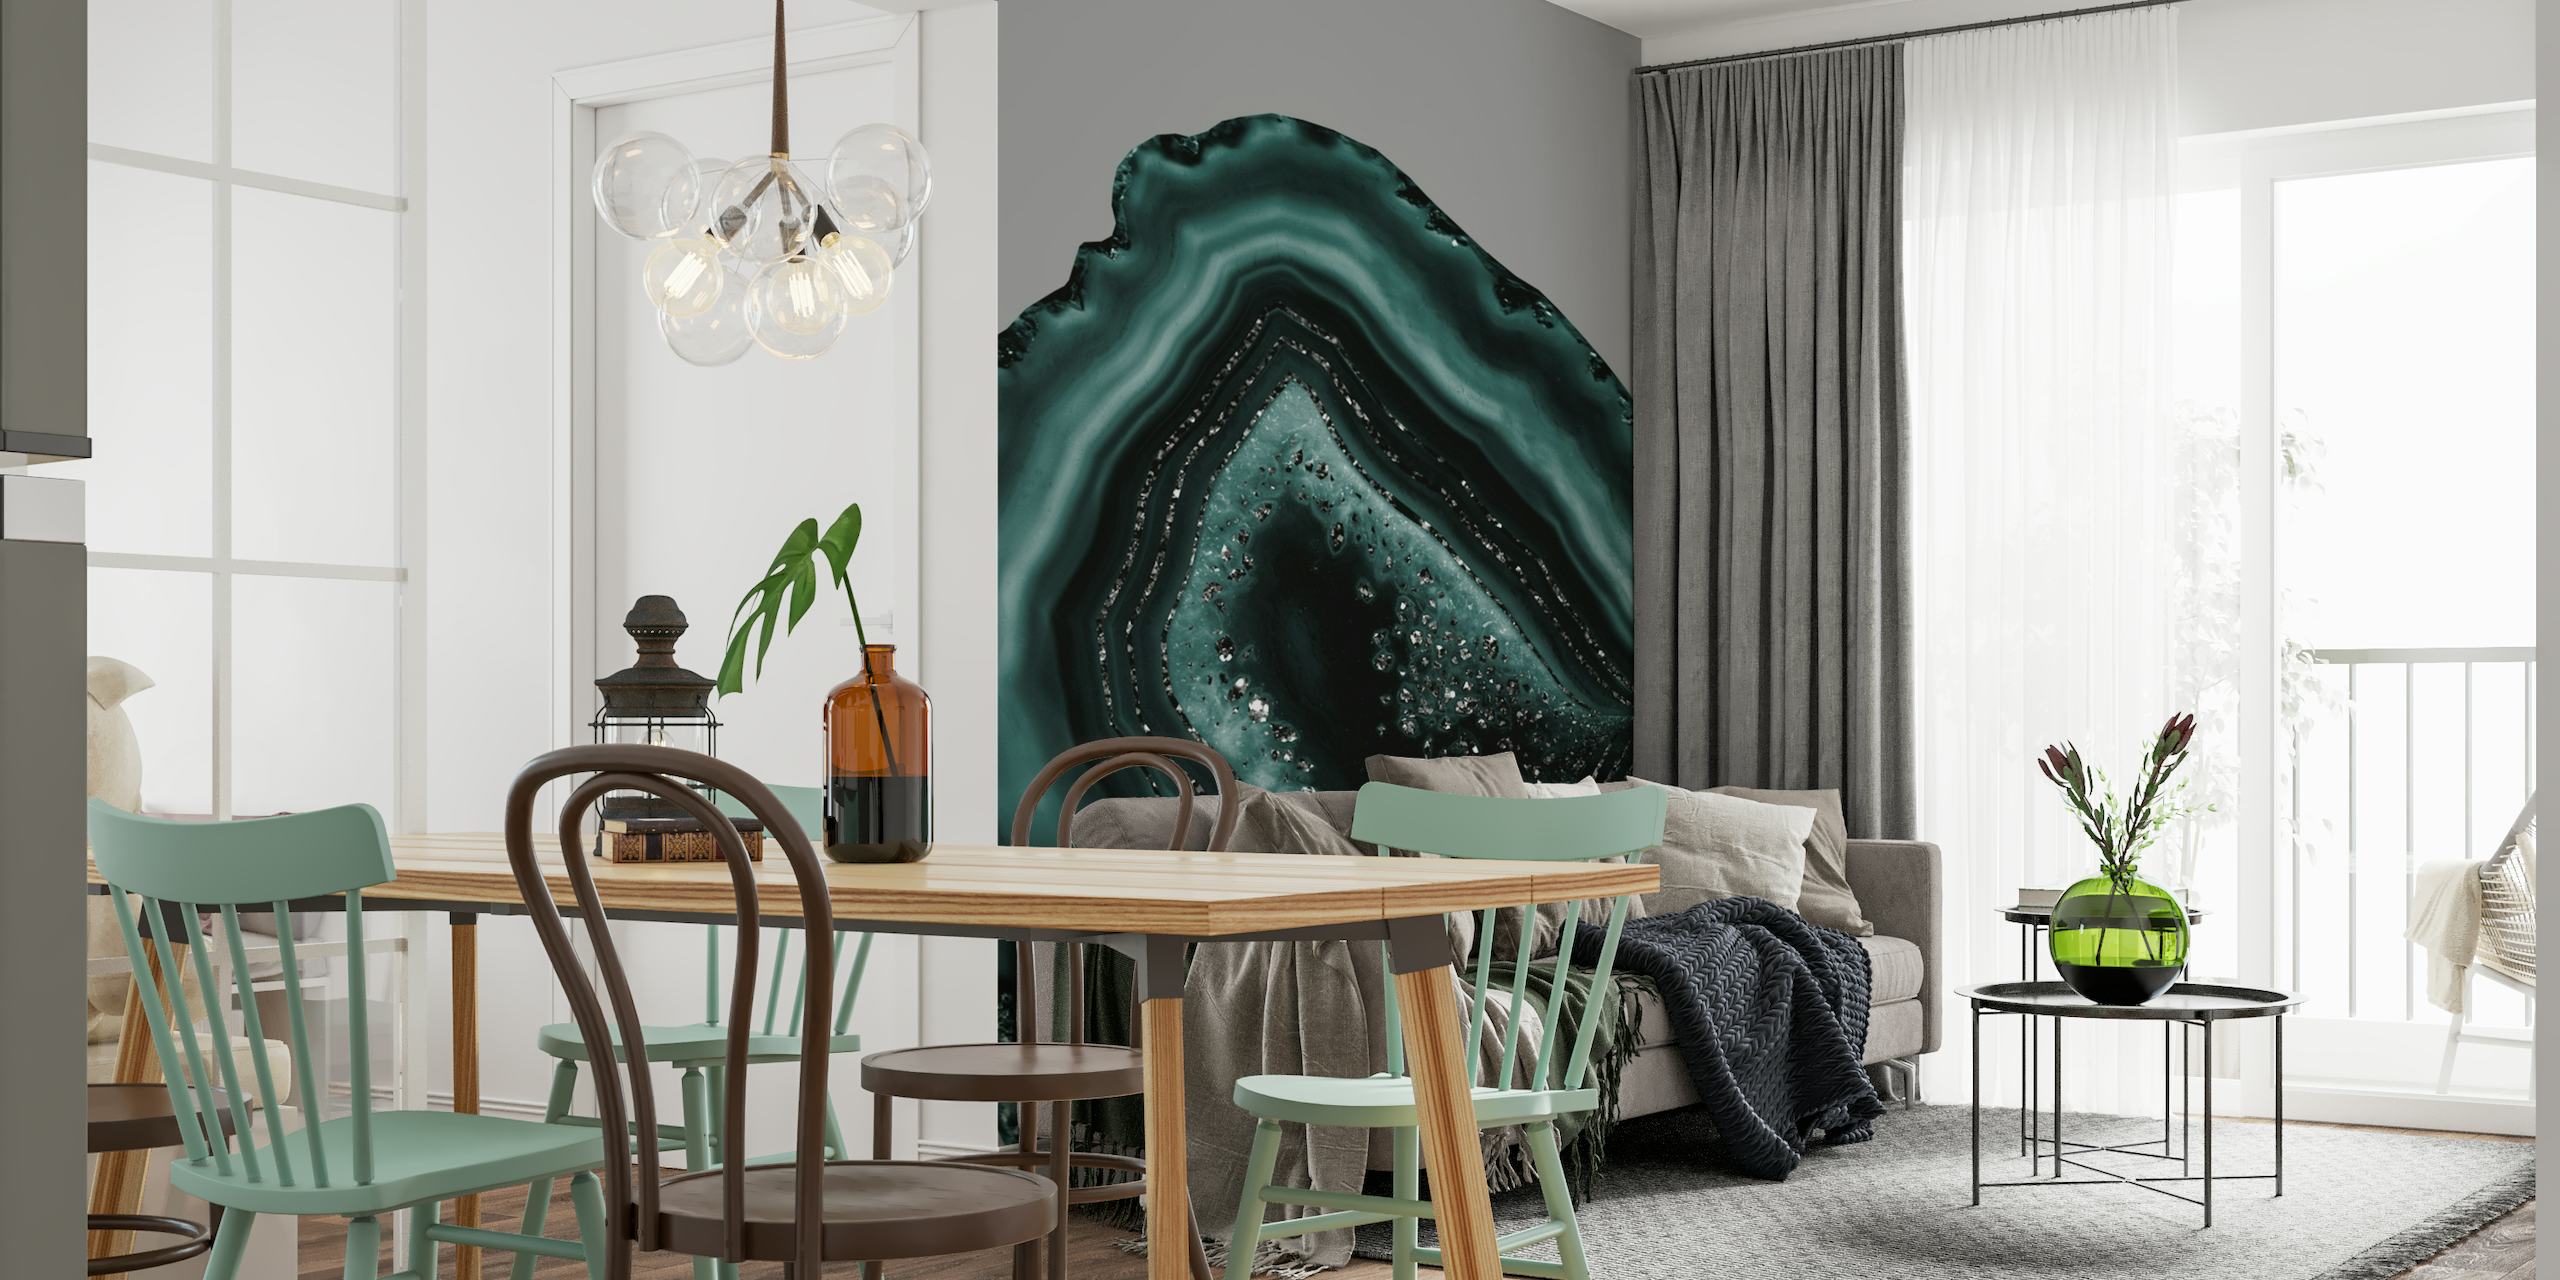 Teal and black agate-inspired wall mural with glitter accents